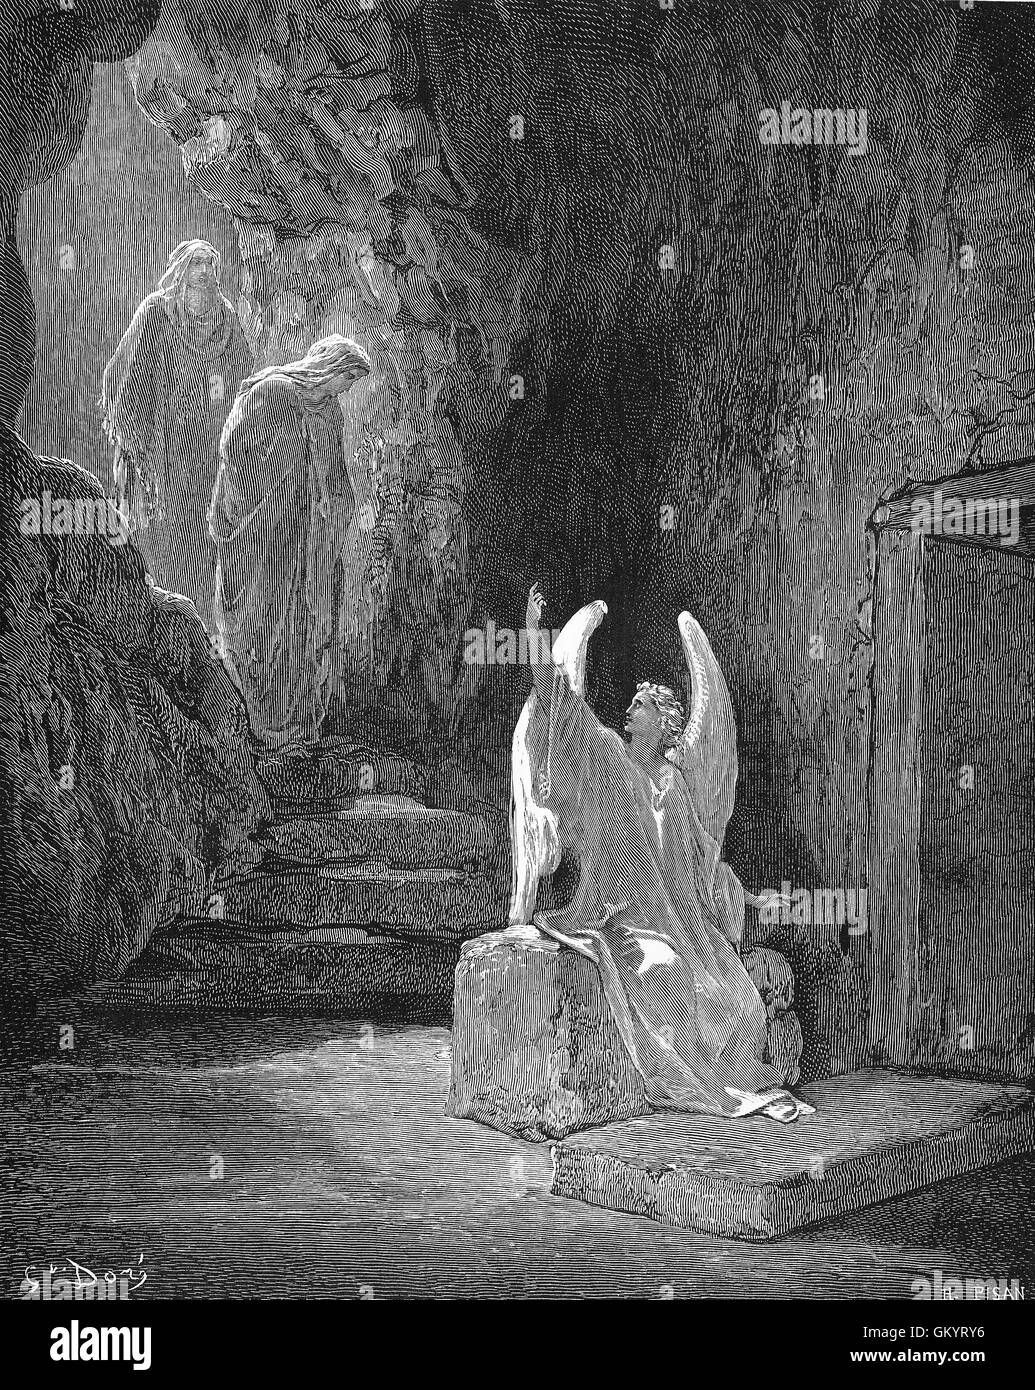 Tomb figurative Black and White Stock Photos & Images - Alamy